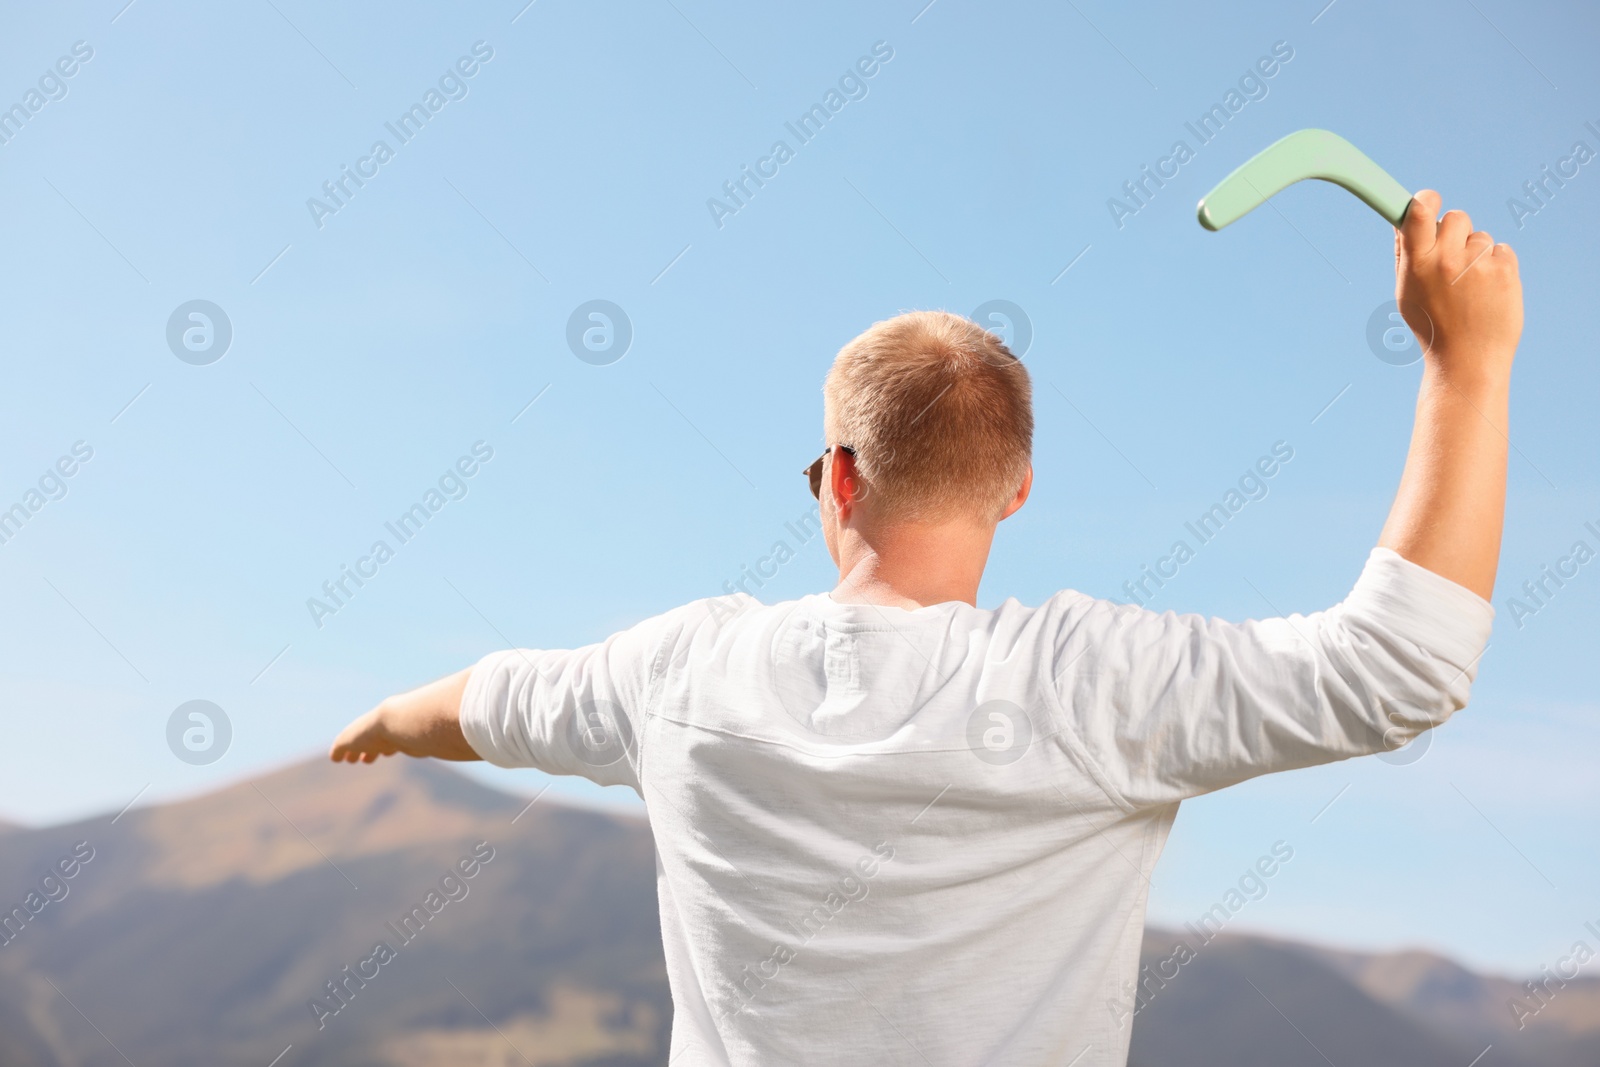 Photo of Man throwing boomerang in mountains on sunny day, back view